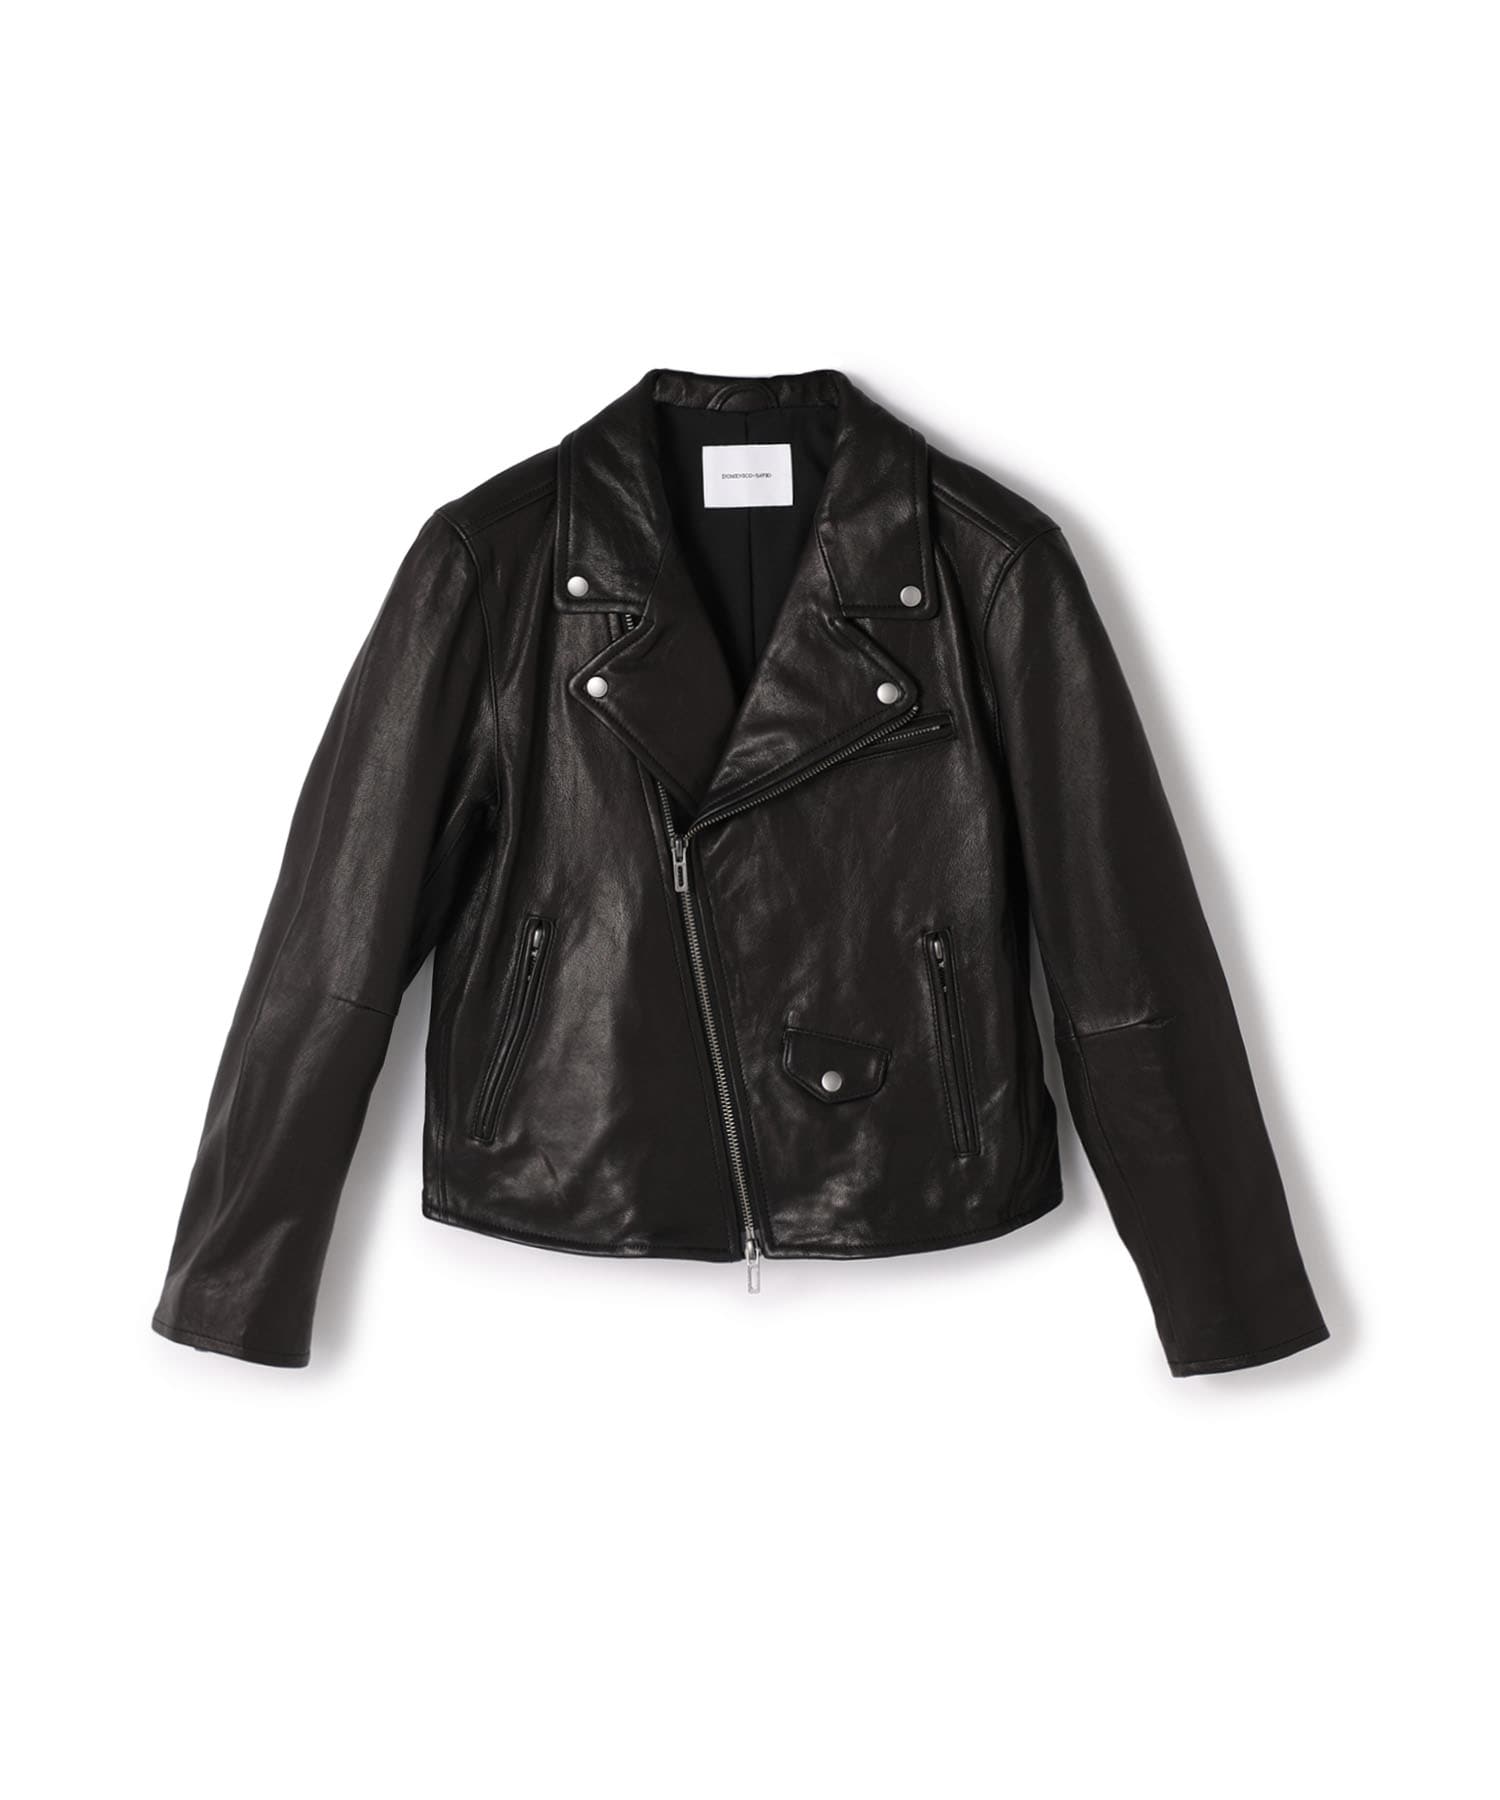 STUDIOUS RIDERS JACKET: ｜ STUDIOUS ONLINE公式通販サイト